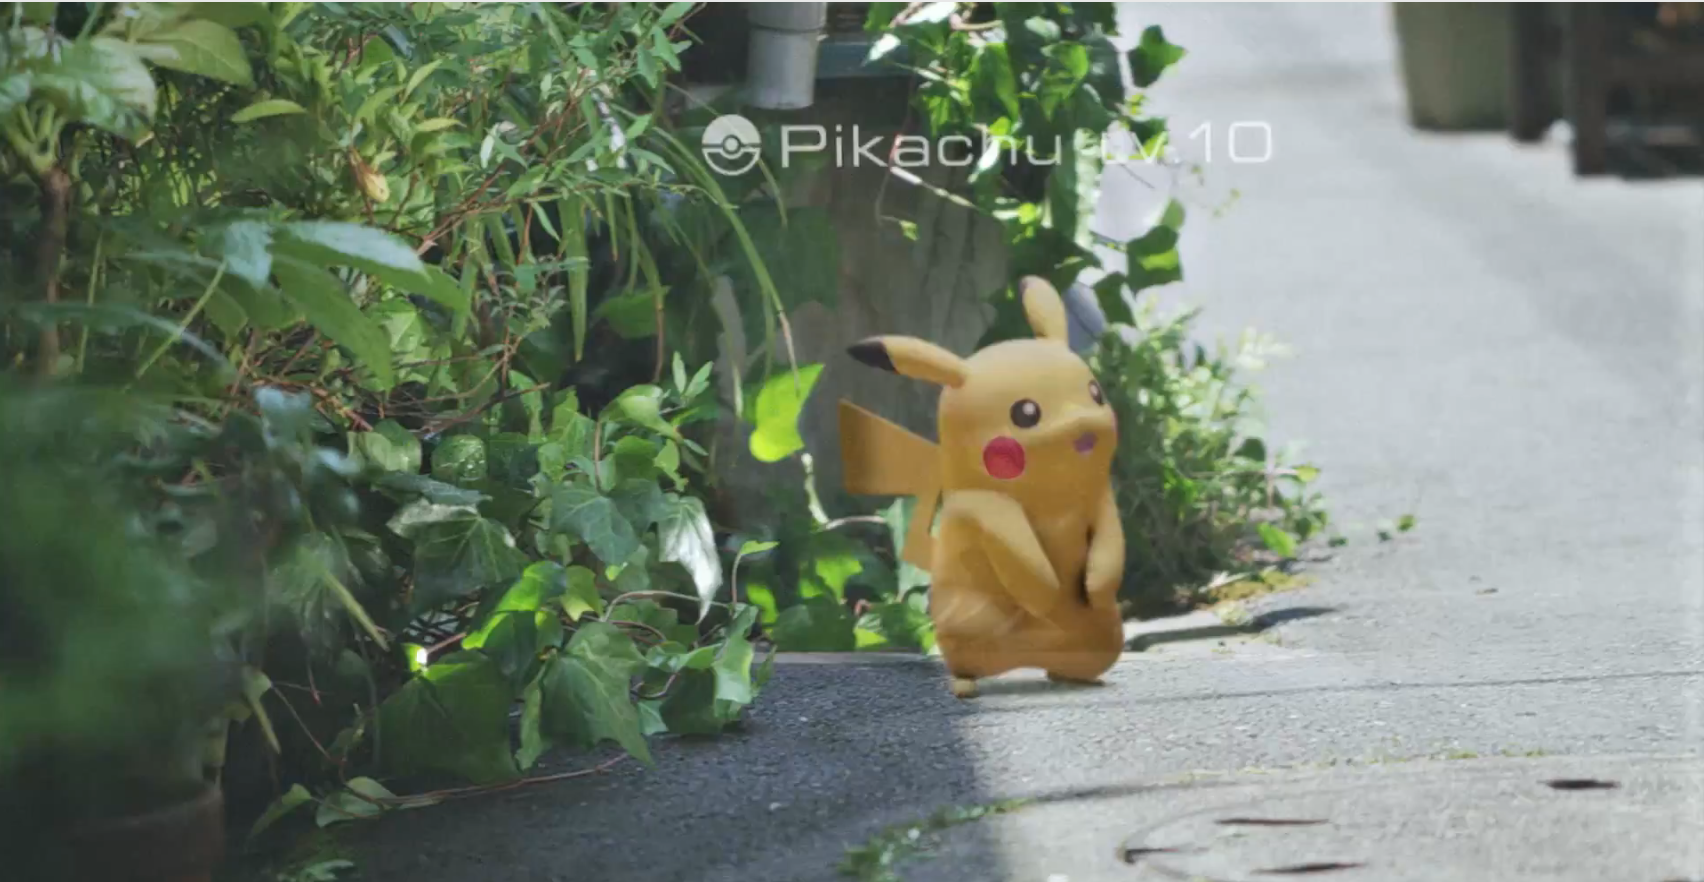 Real life Pokemon catching app will send you to museums and